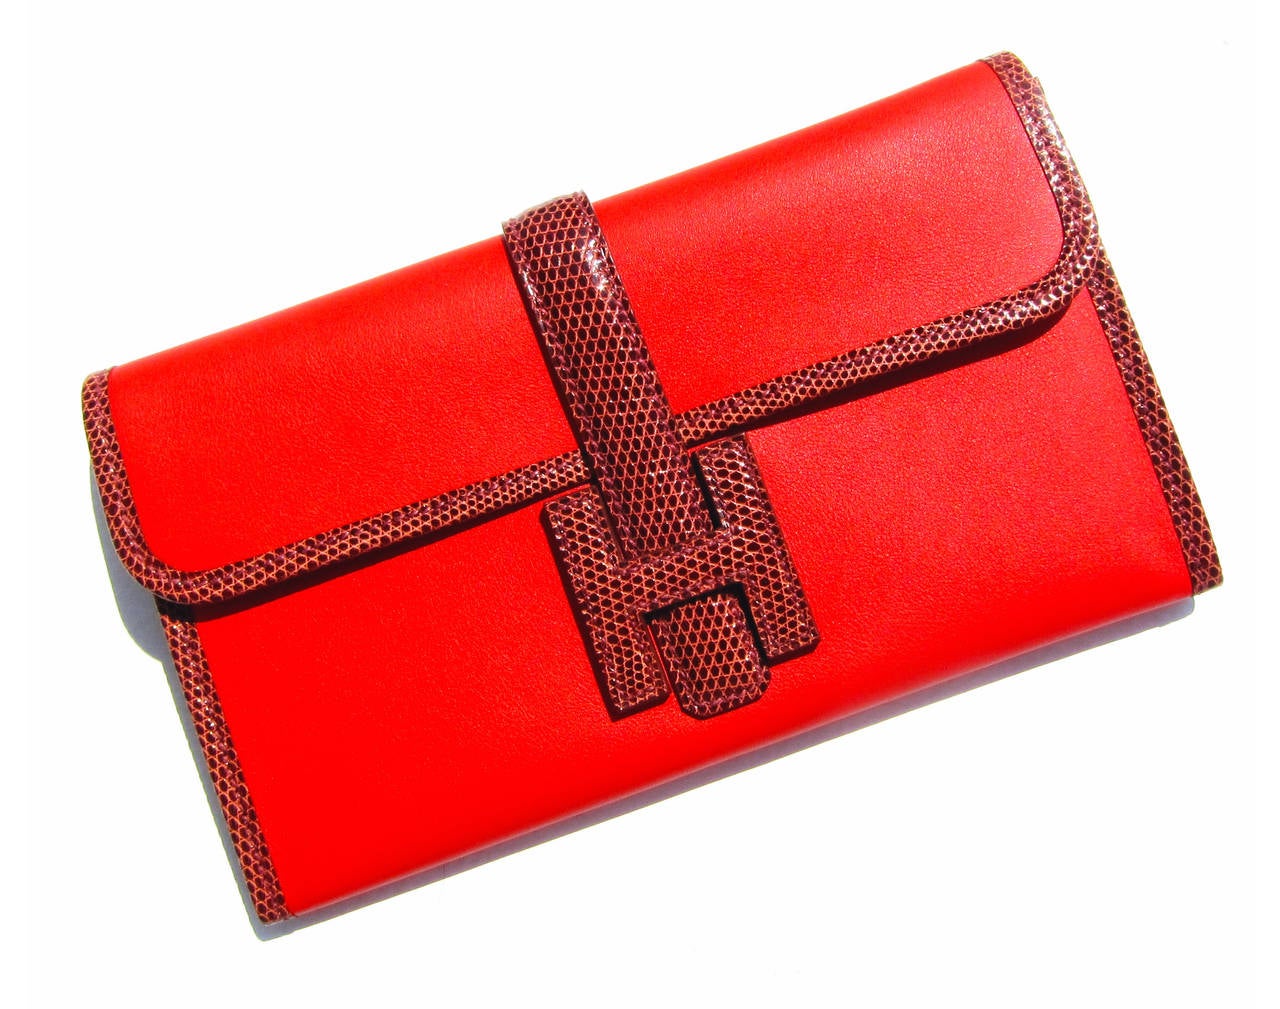 Hermes Capucine Etrusque Swift Lizard Niloticus Jige Duo Mini Clutch

Brand New in Box 
Store fresh coming with sleeper, Hermes box and ribbon
Absolutely stunning and rare
Capucine is a vibrant orange with red tone
In Swift trimmed with